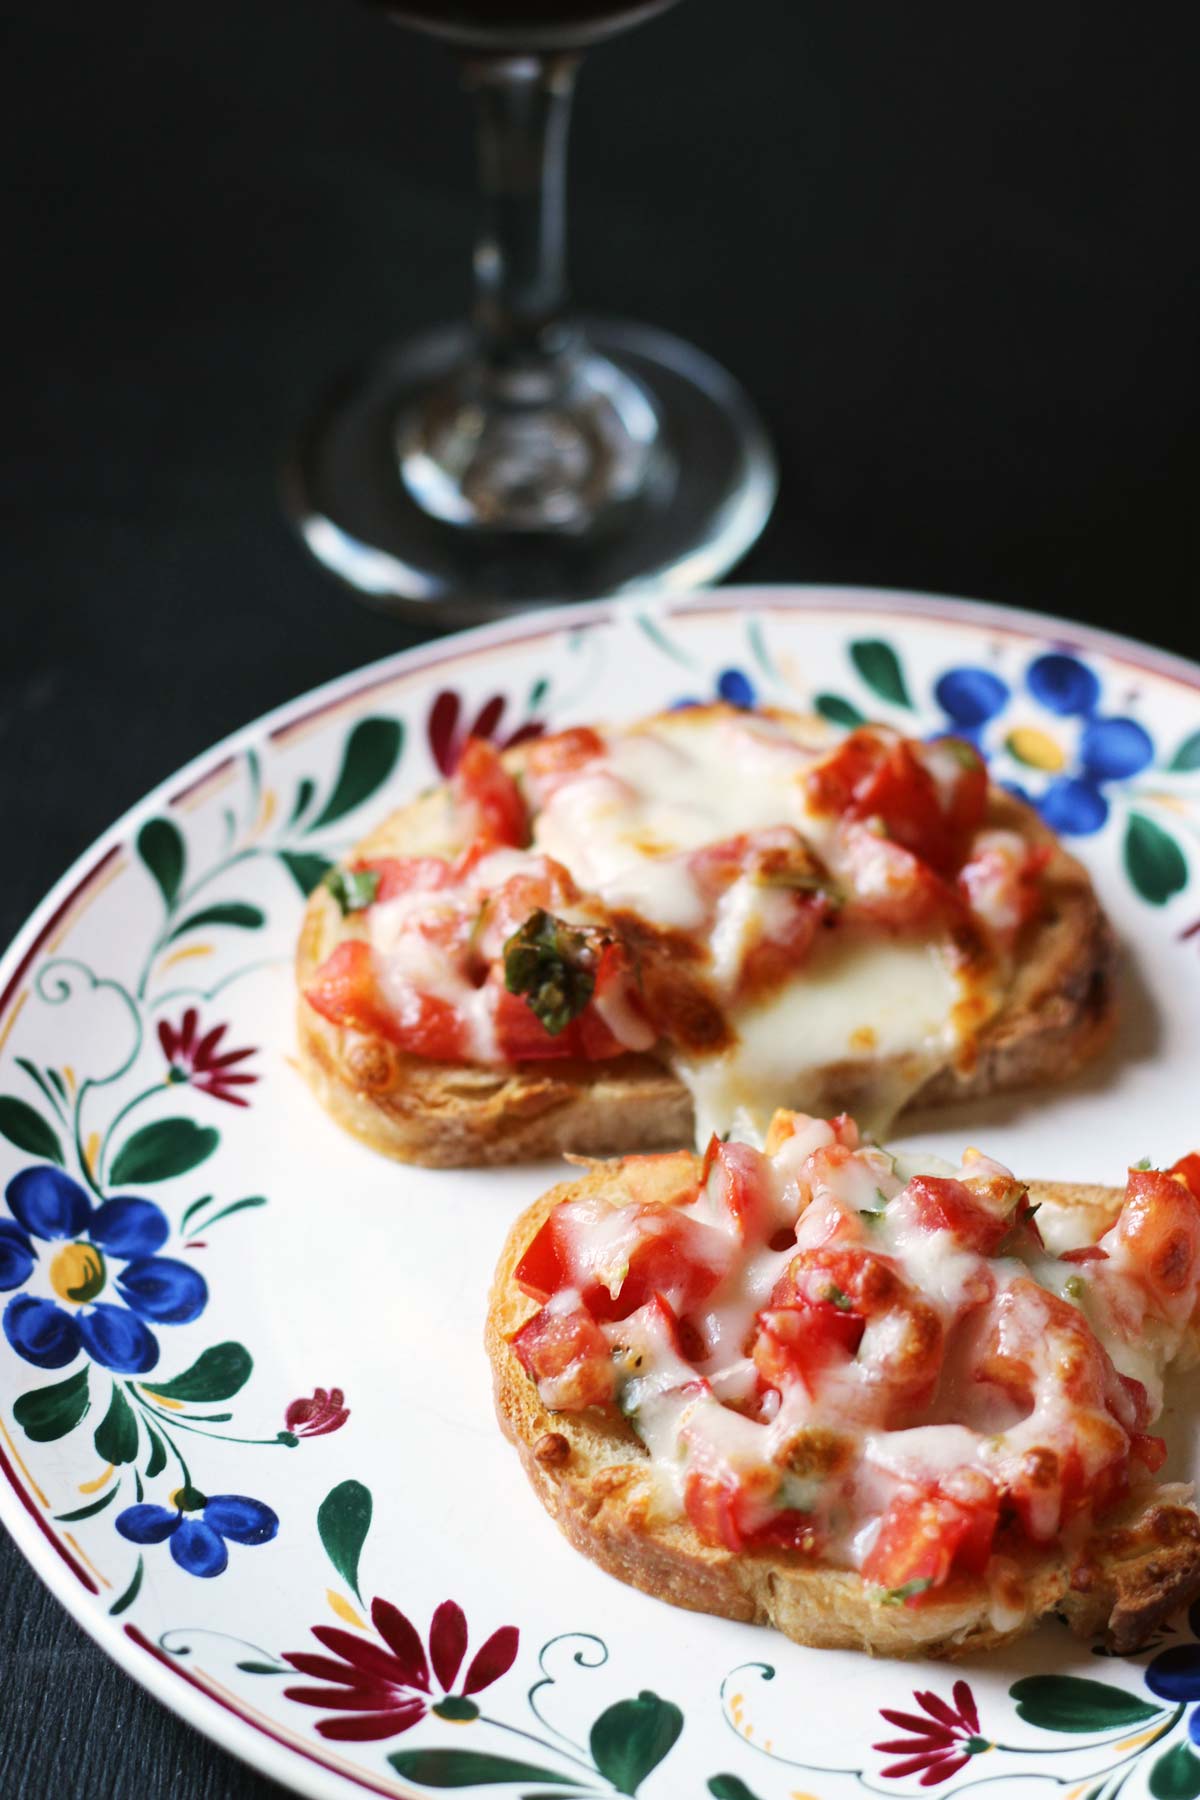 two cheese topped bruschetta on plate next to a glass of wine.